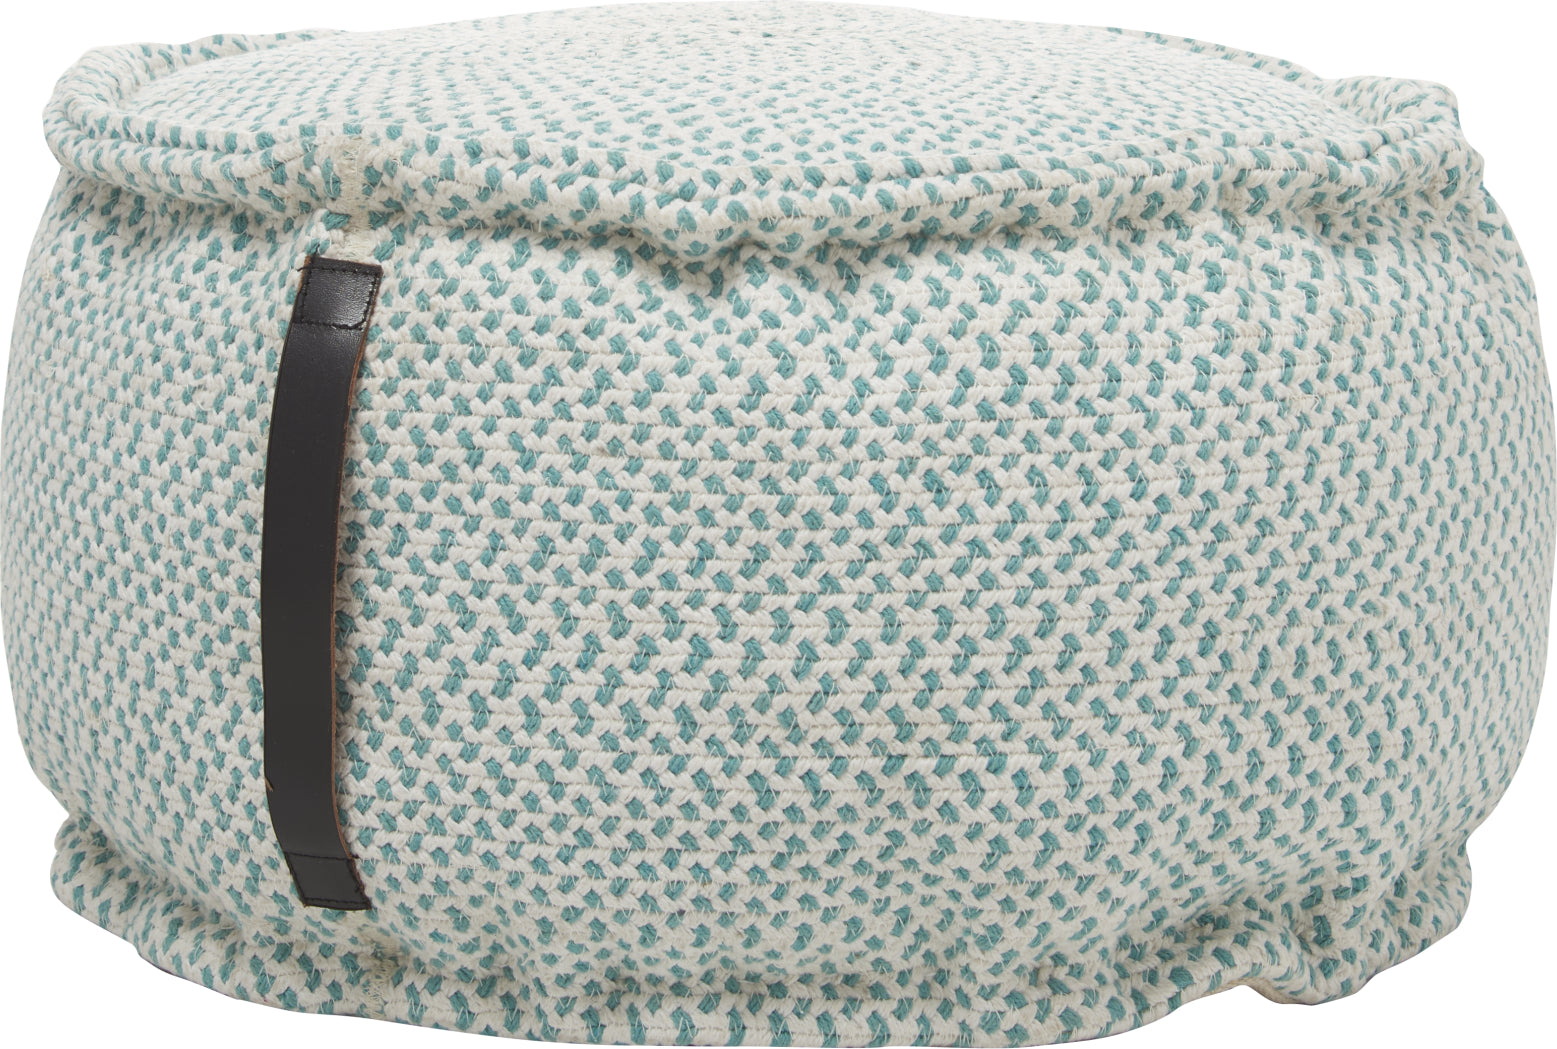 Nourison Outdoor Pillows Woven Pouf Turquoise by Mina Victory main image